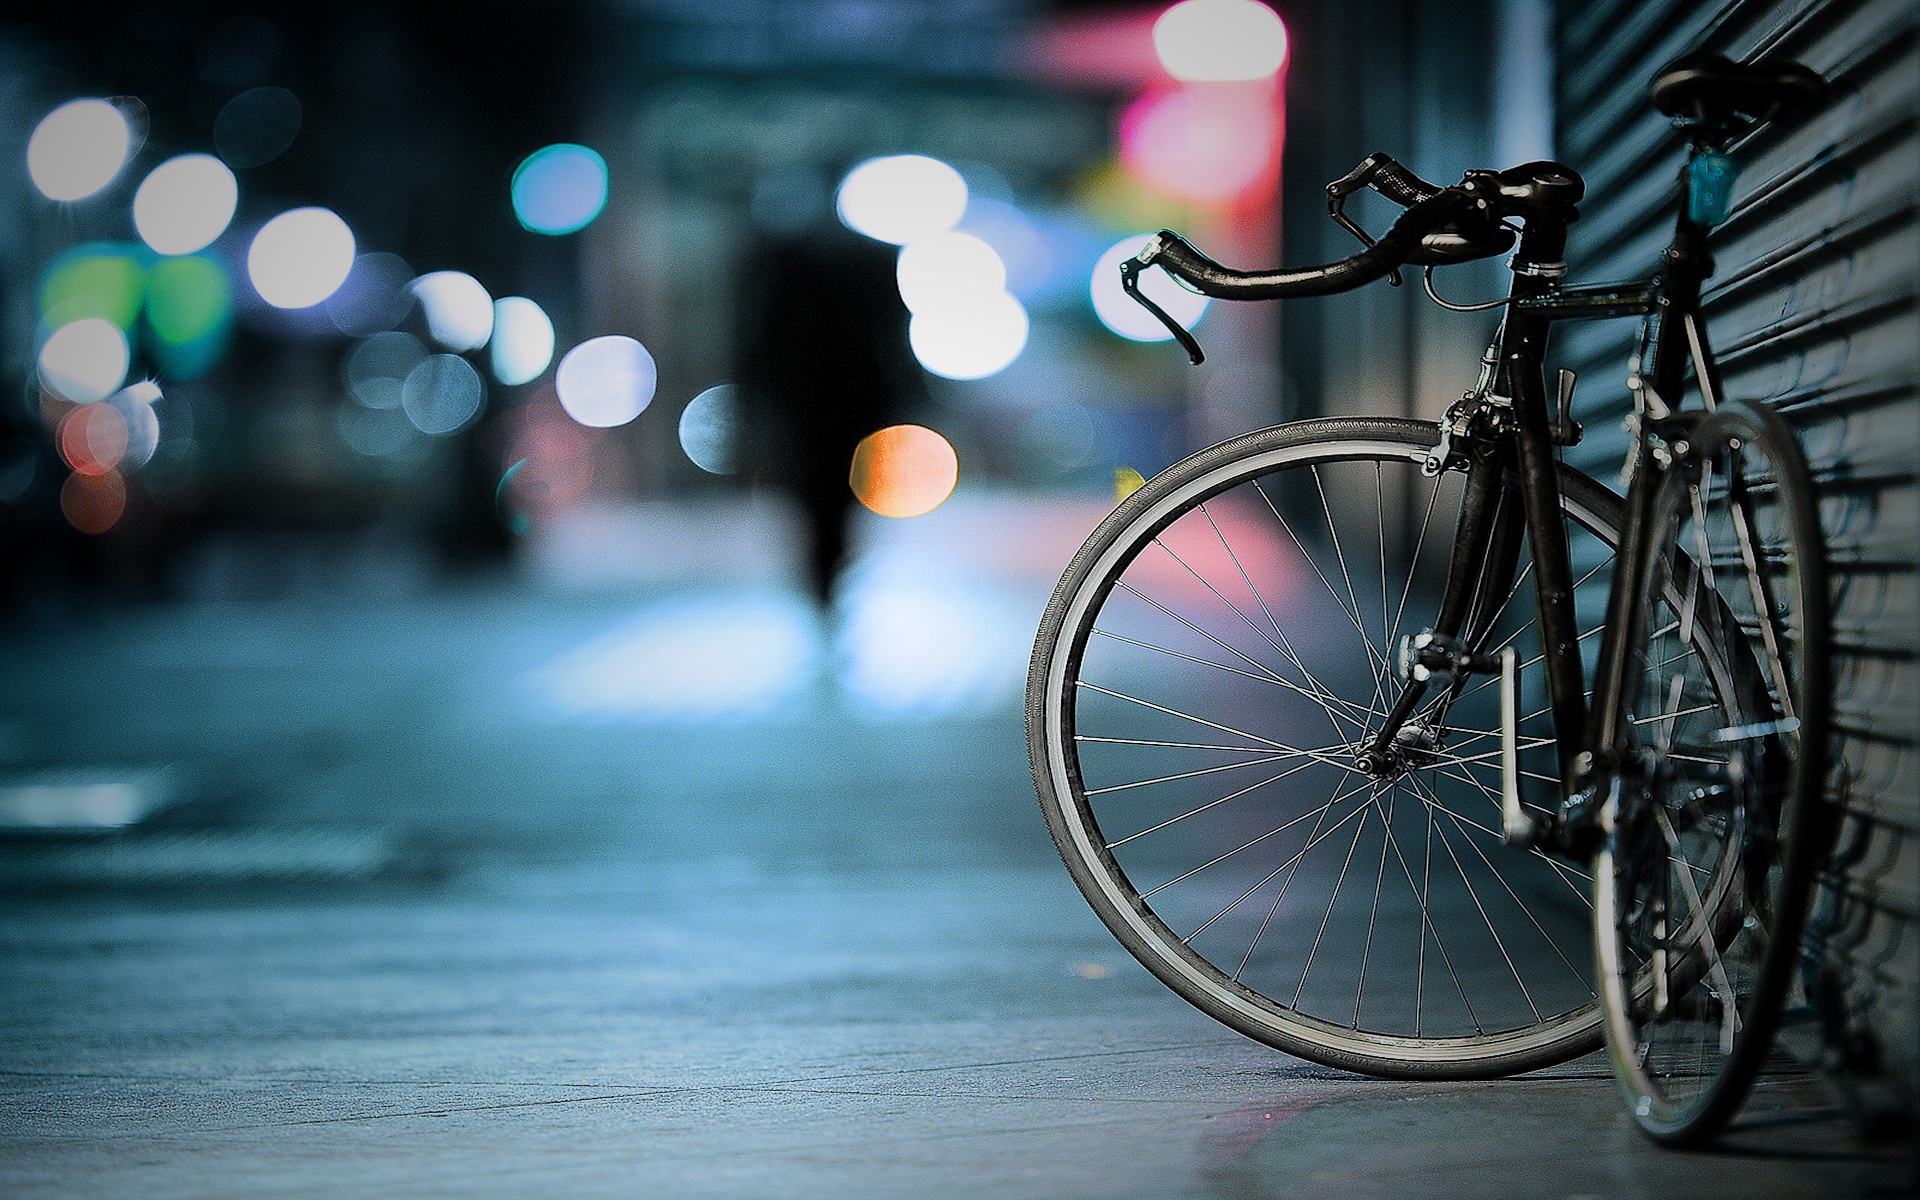 Collection of bicycle wallpapers, Varied styles and themes, 1920x1200 HD Desktop